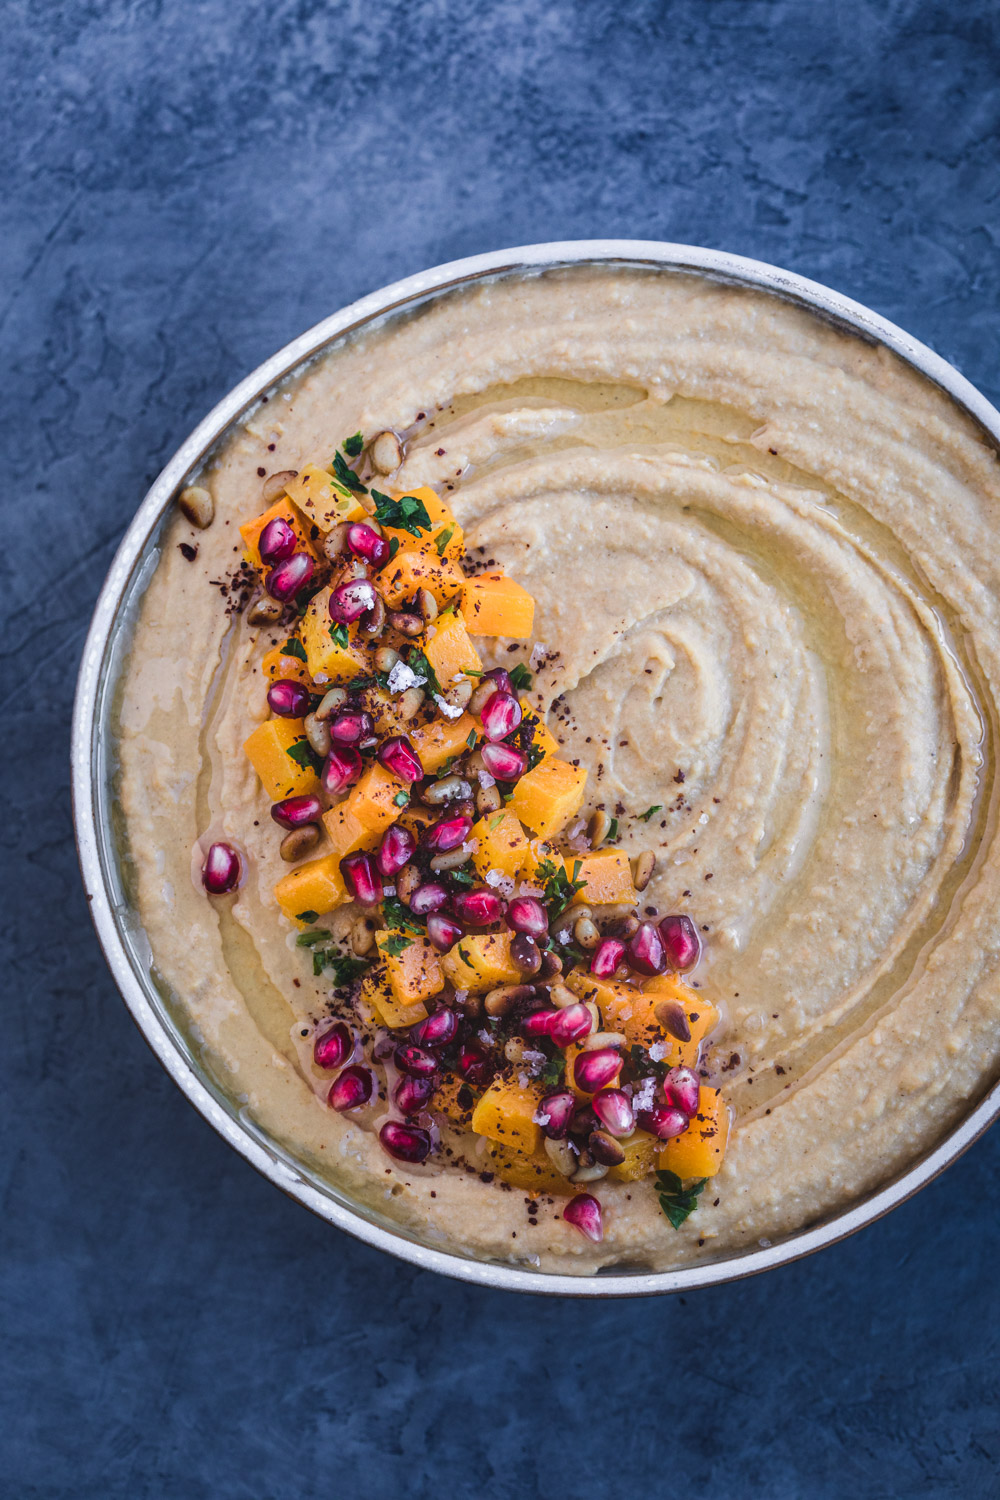 Overshot shot of butternut squash roasted hummus with cubed butternut roasted squash, pomegranate seeds, pastel, pinuts, sumac and flaky sea salt on top.